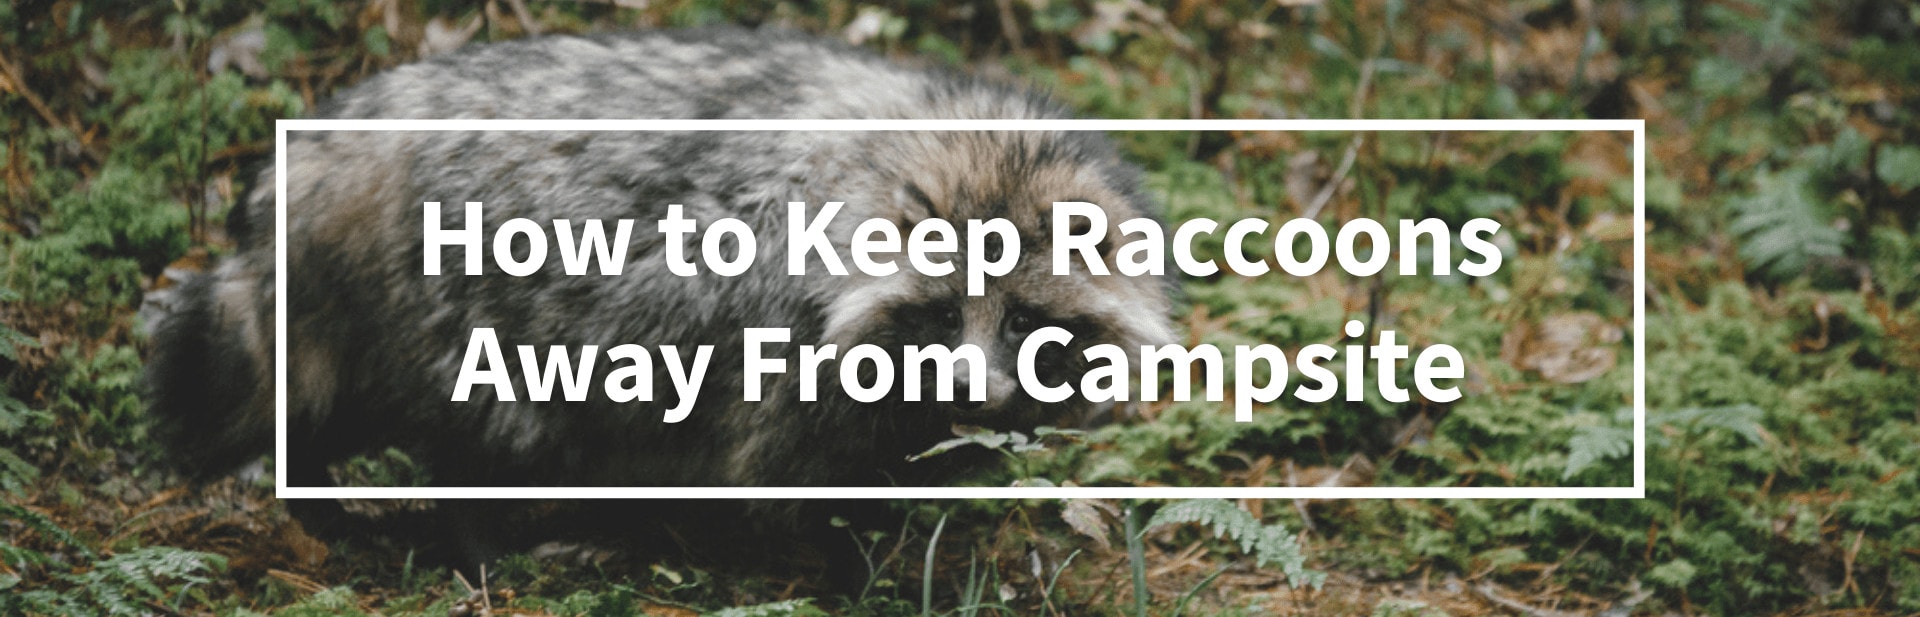 How to Keep Raccoons Away from Campsite: 8 Tips For Critter-Free Camping